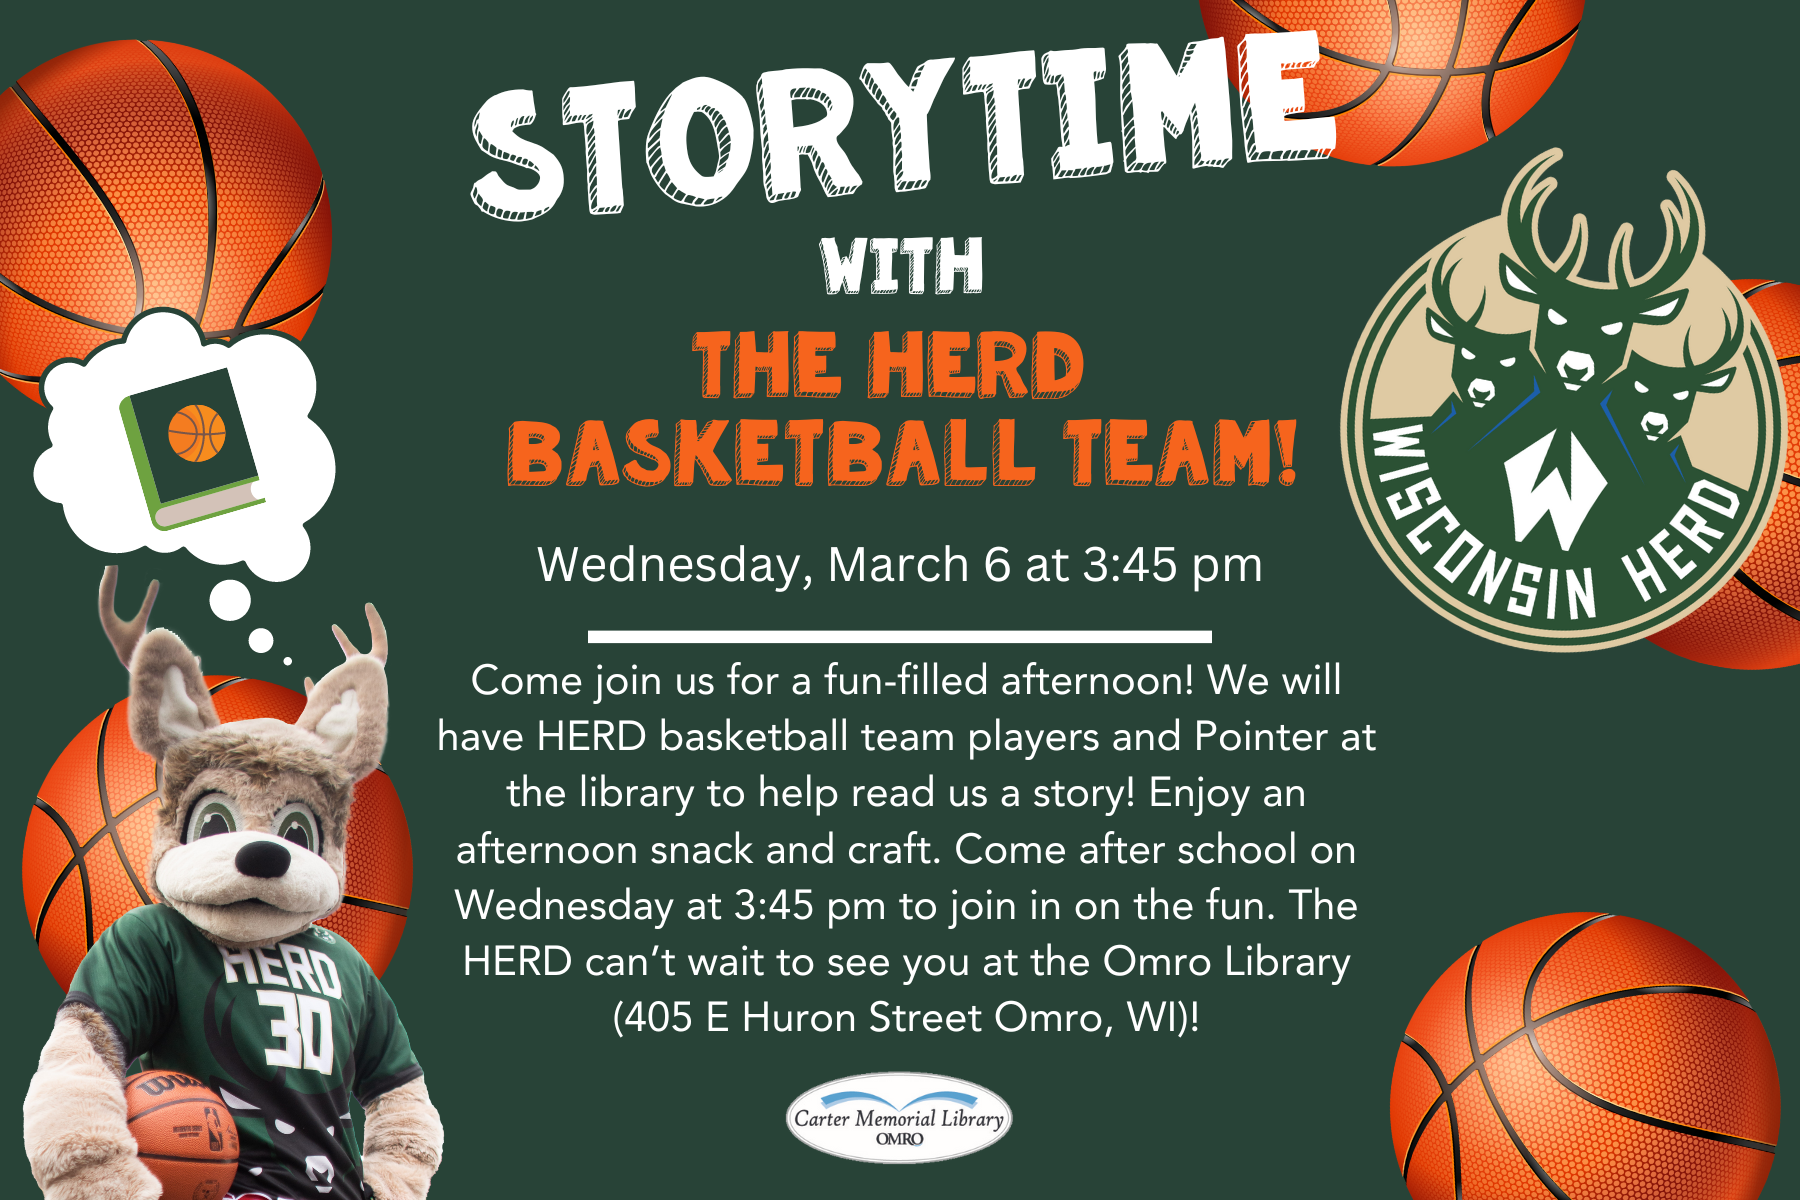 Storytime With the Herd!